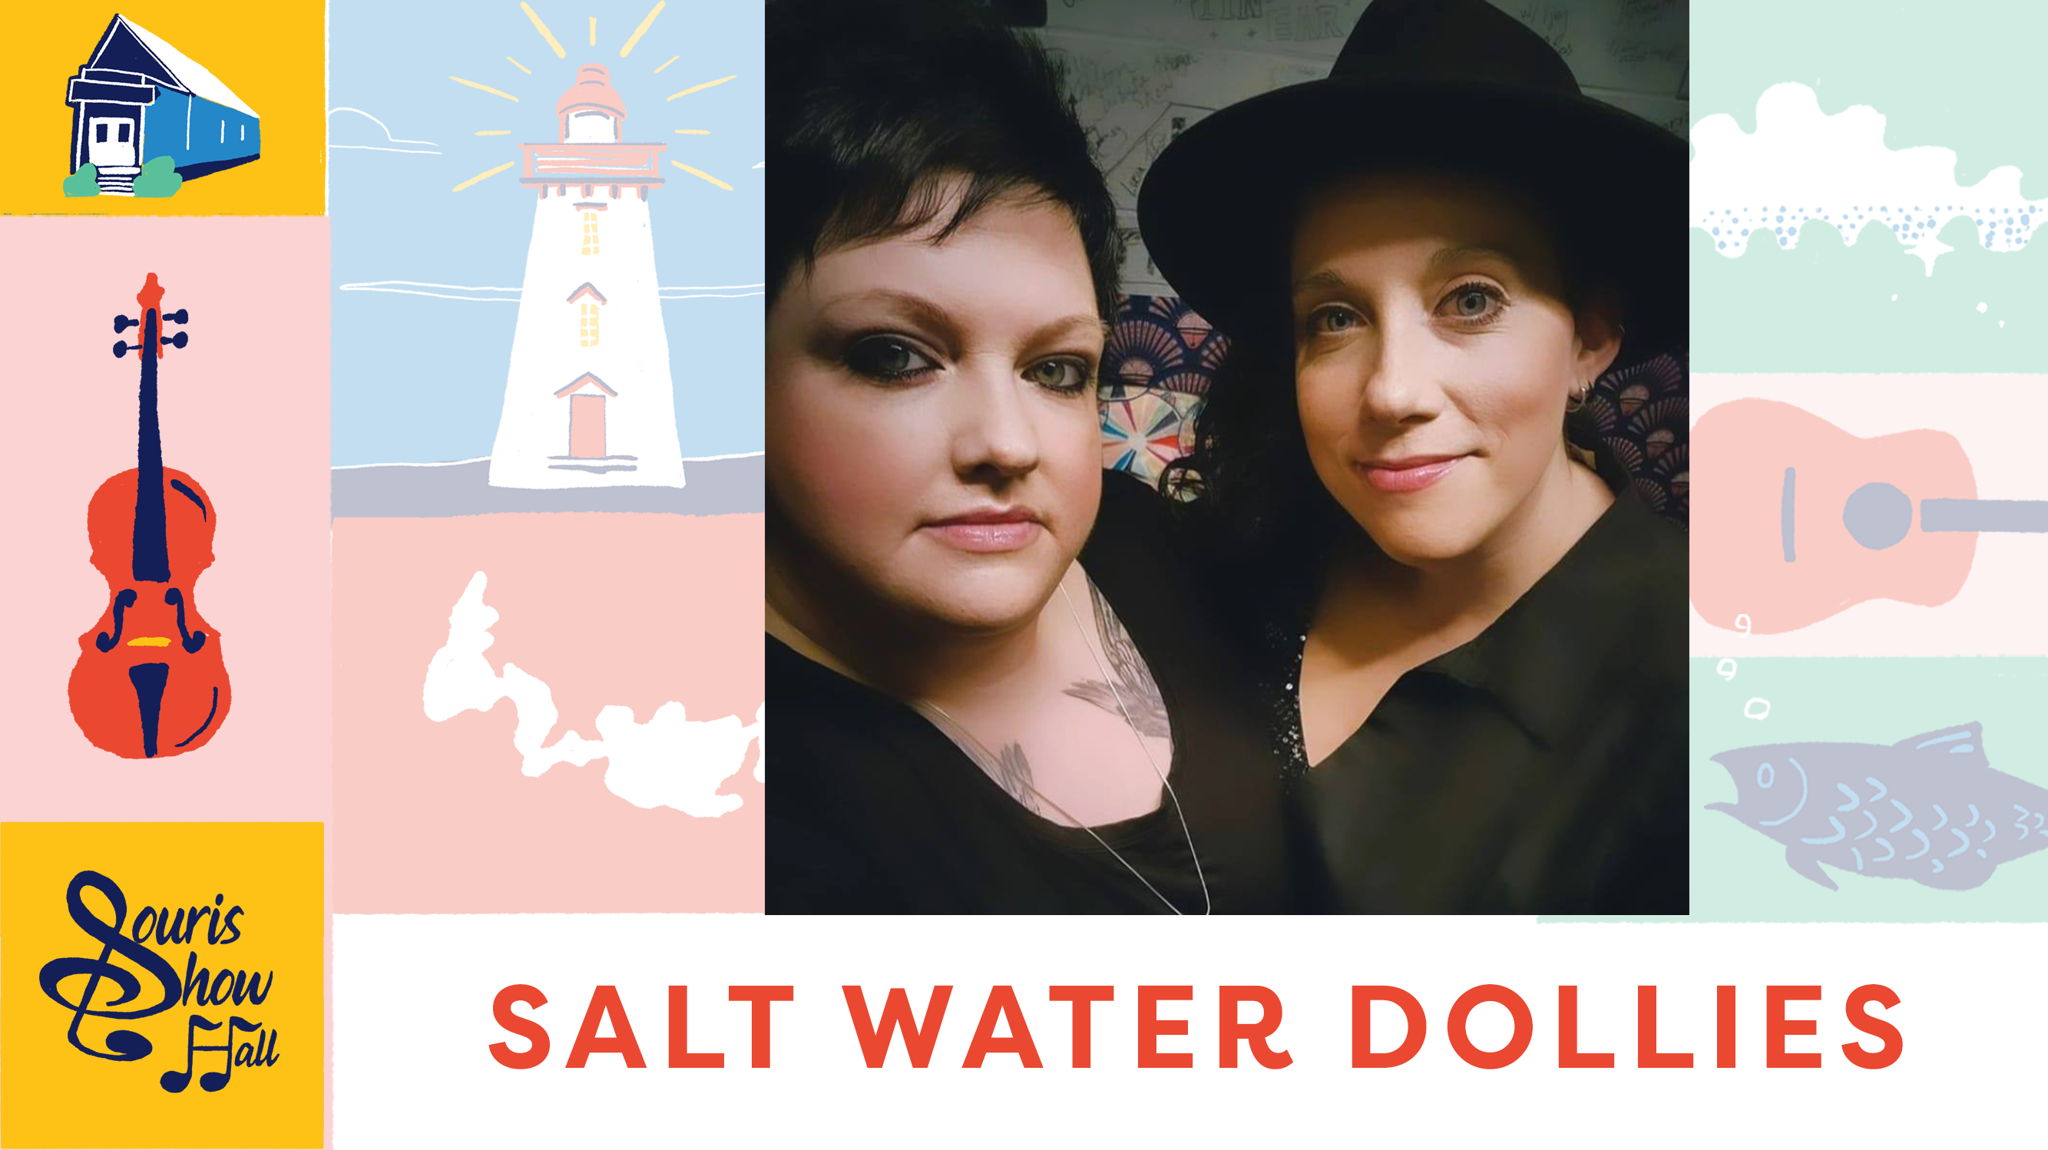 Salt Water Dollies at the Souris Show Hall